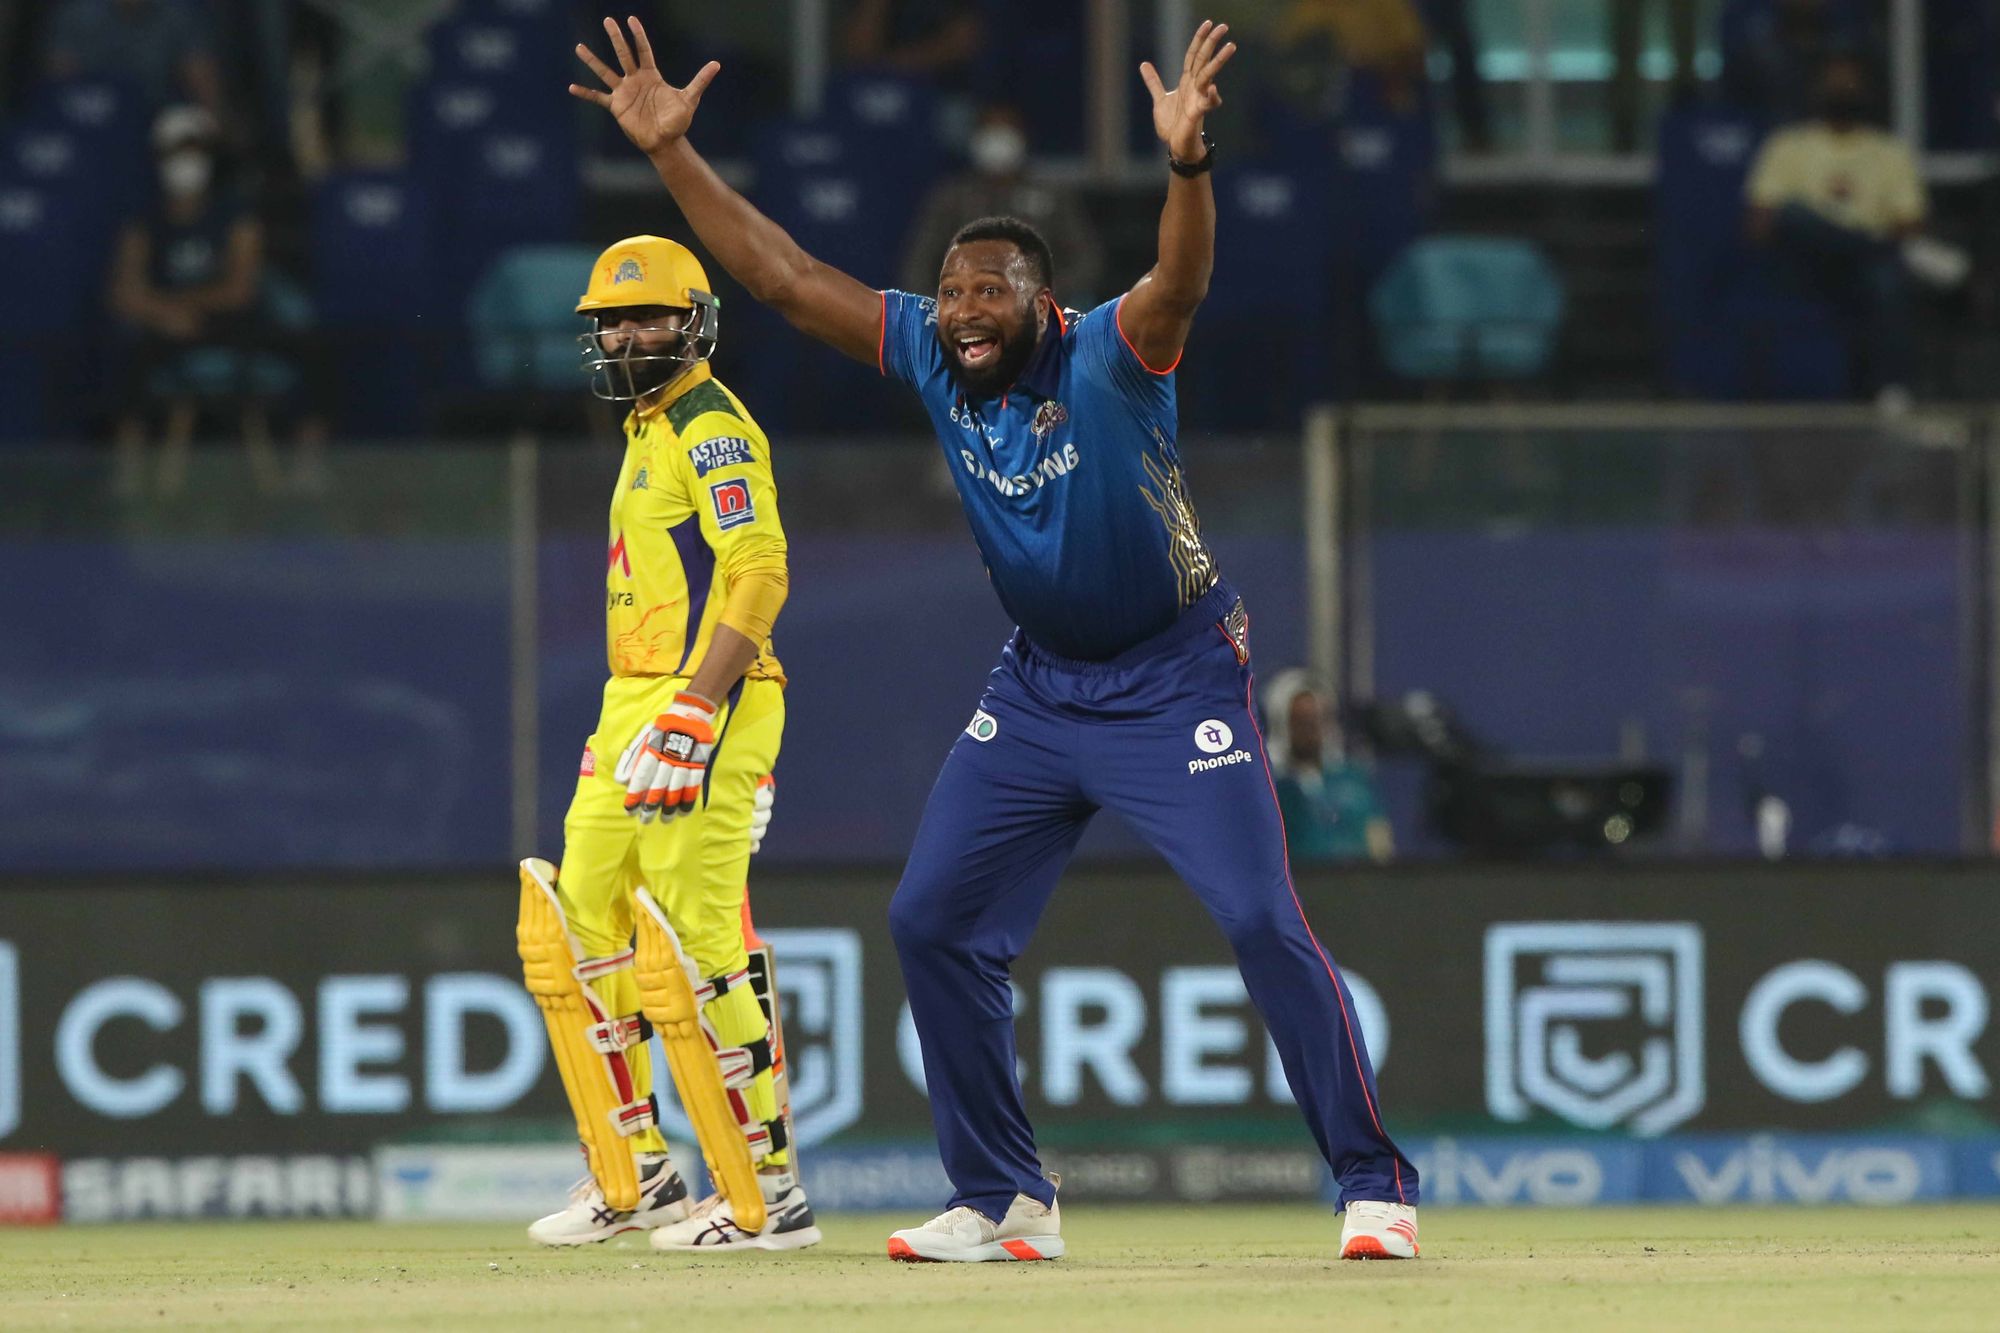 Cricket West Indies confirms West Indies players in IPL are back home